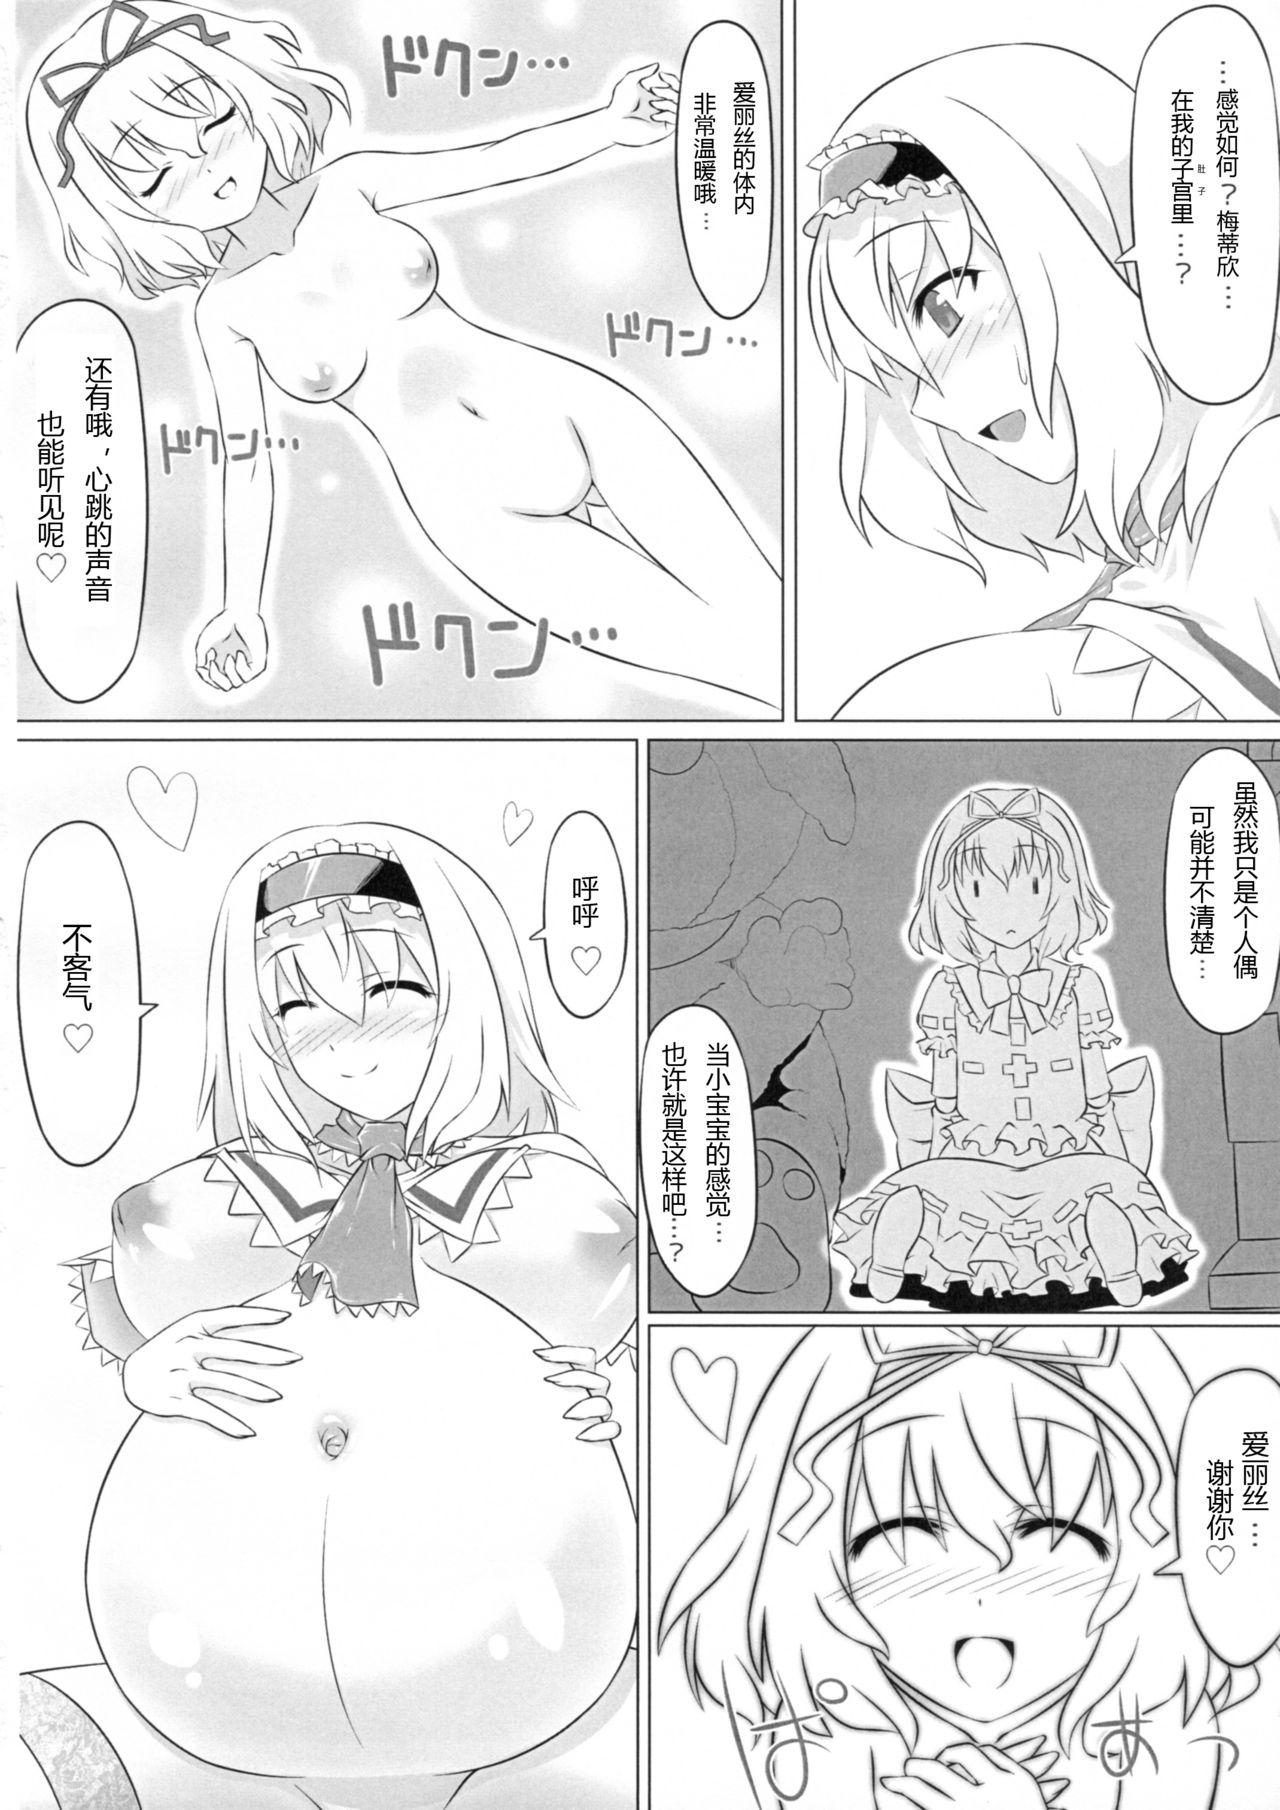 Topless IN TO DELIRIUM - Touhou project Free Amature Porn - Page 10